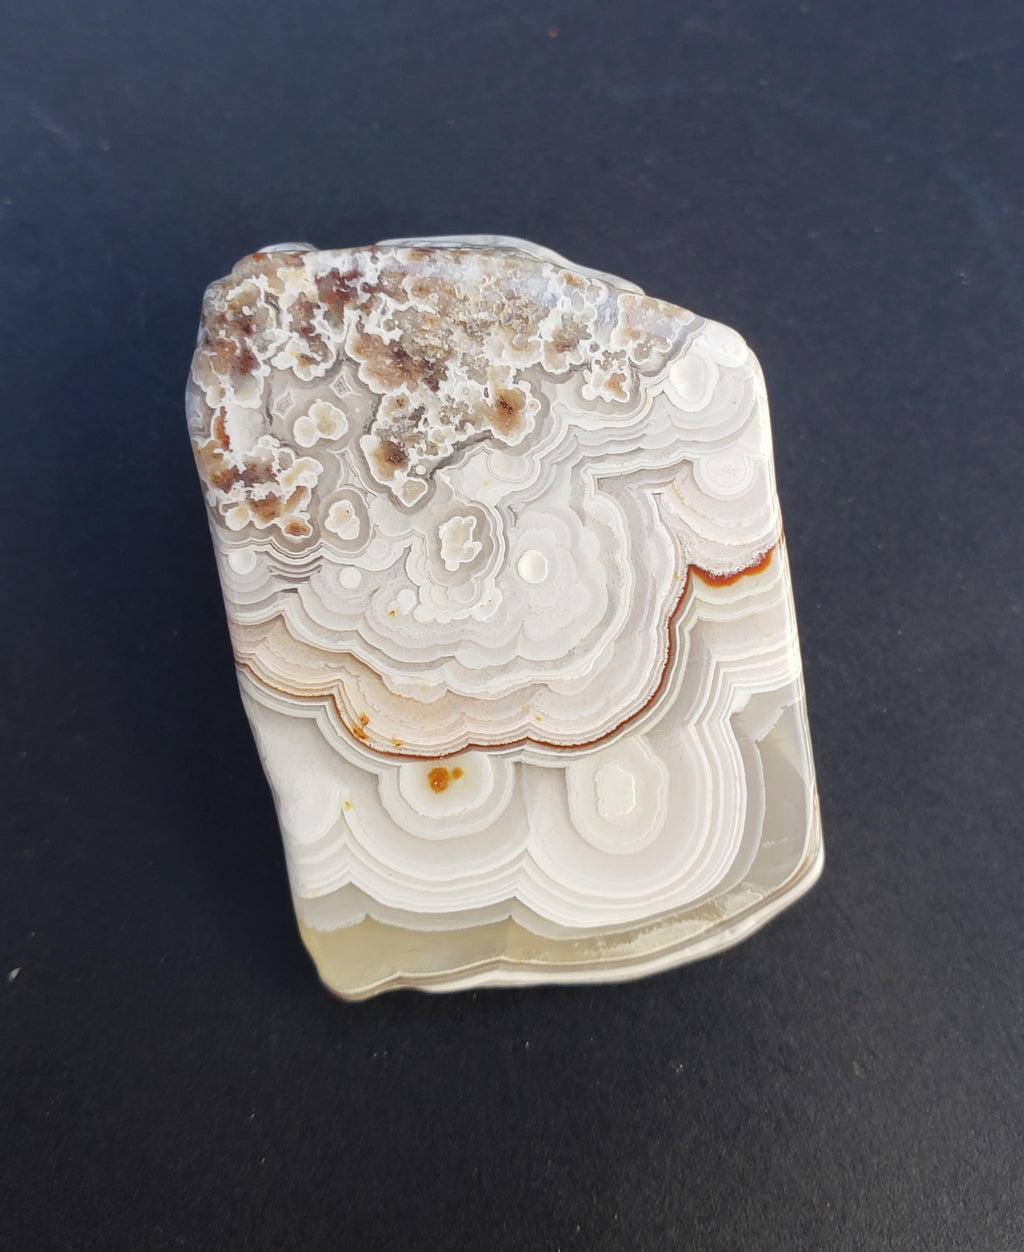 Mexican crazy lace agate freeform slice - 14grams - awesome outer edge bubbles